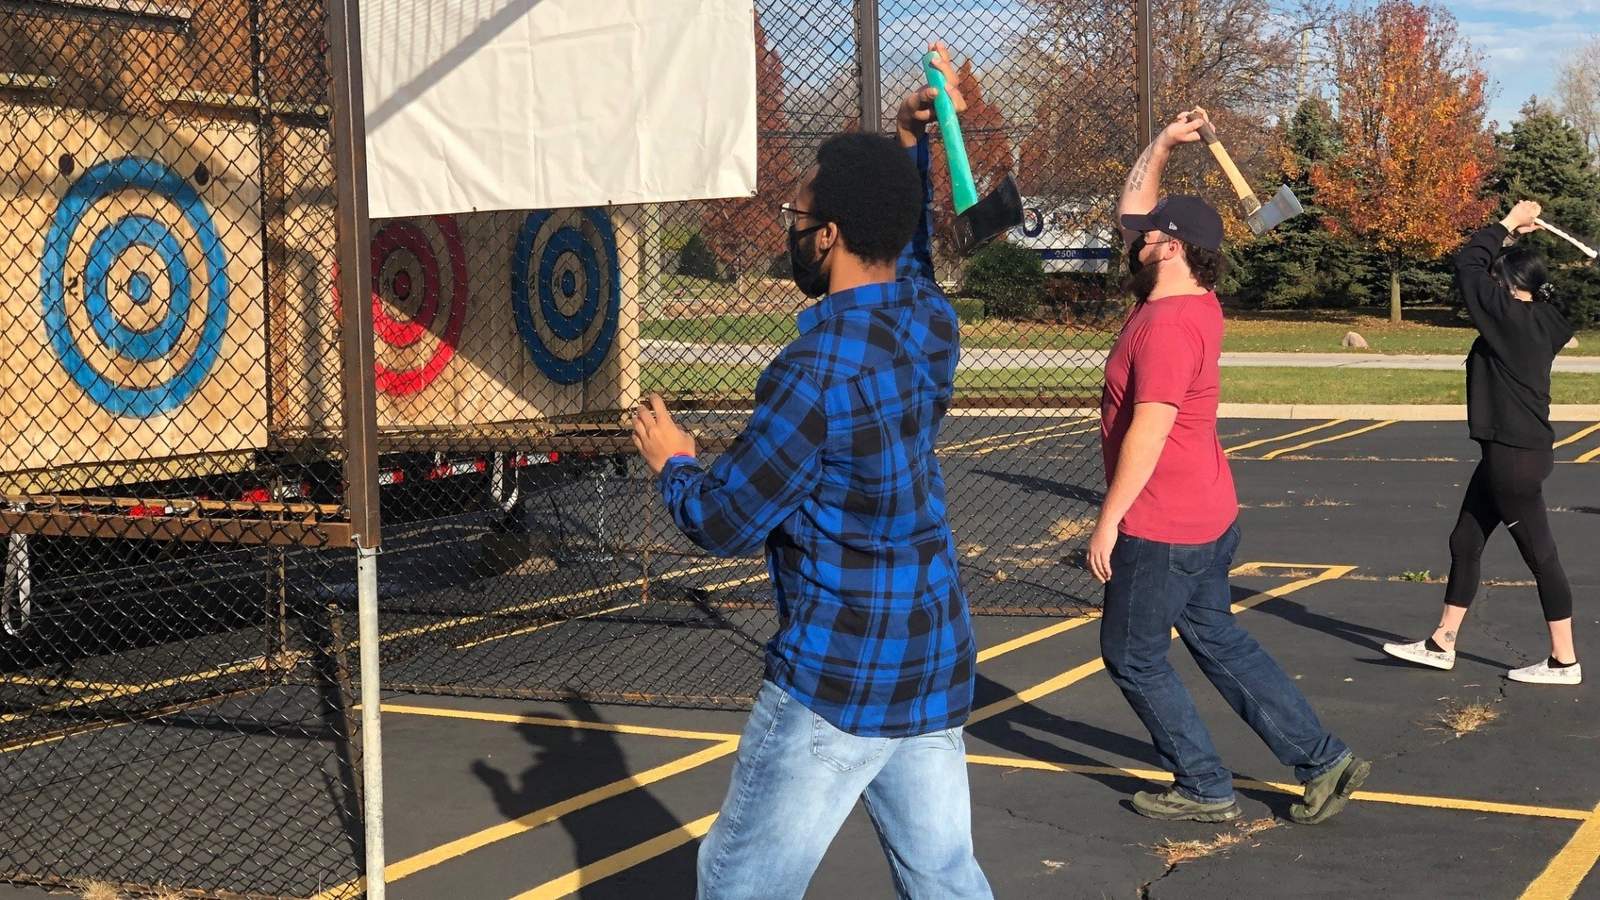 Fun hits the road with this mobile axe throwing unit